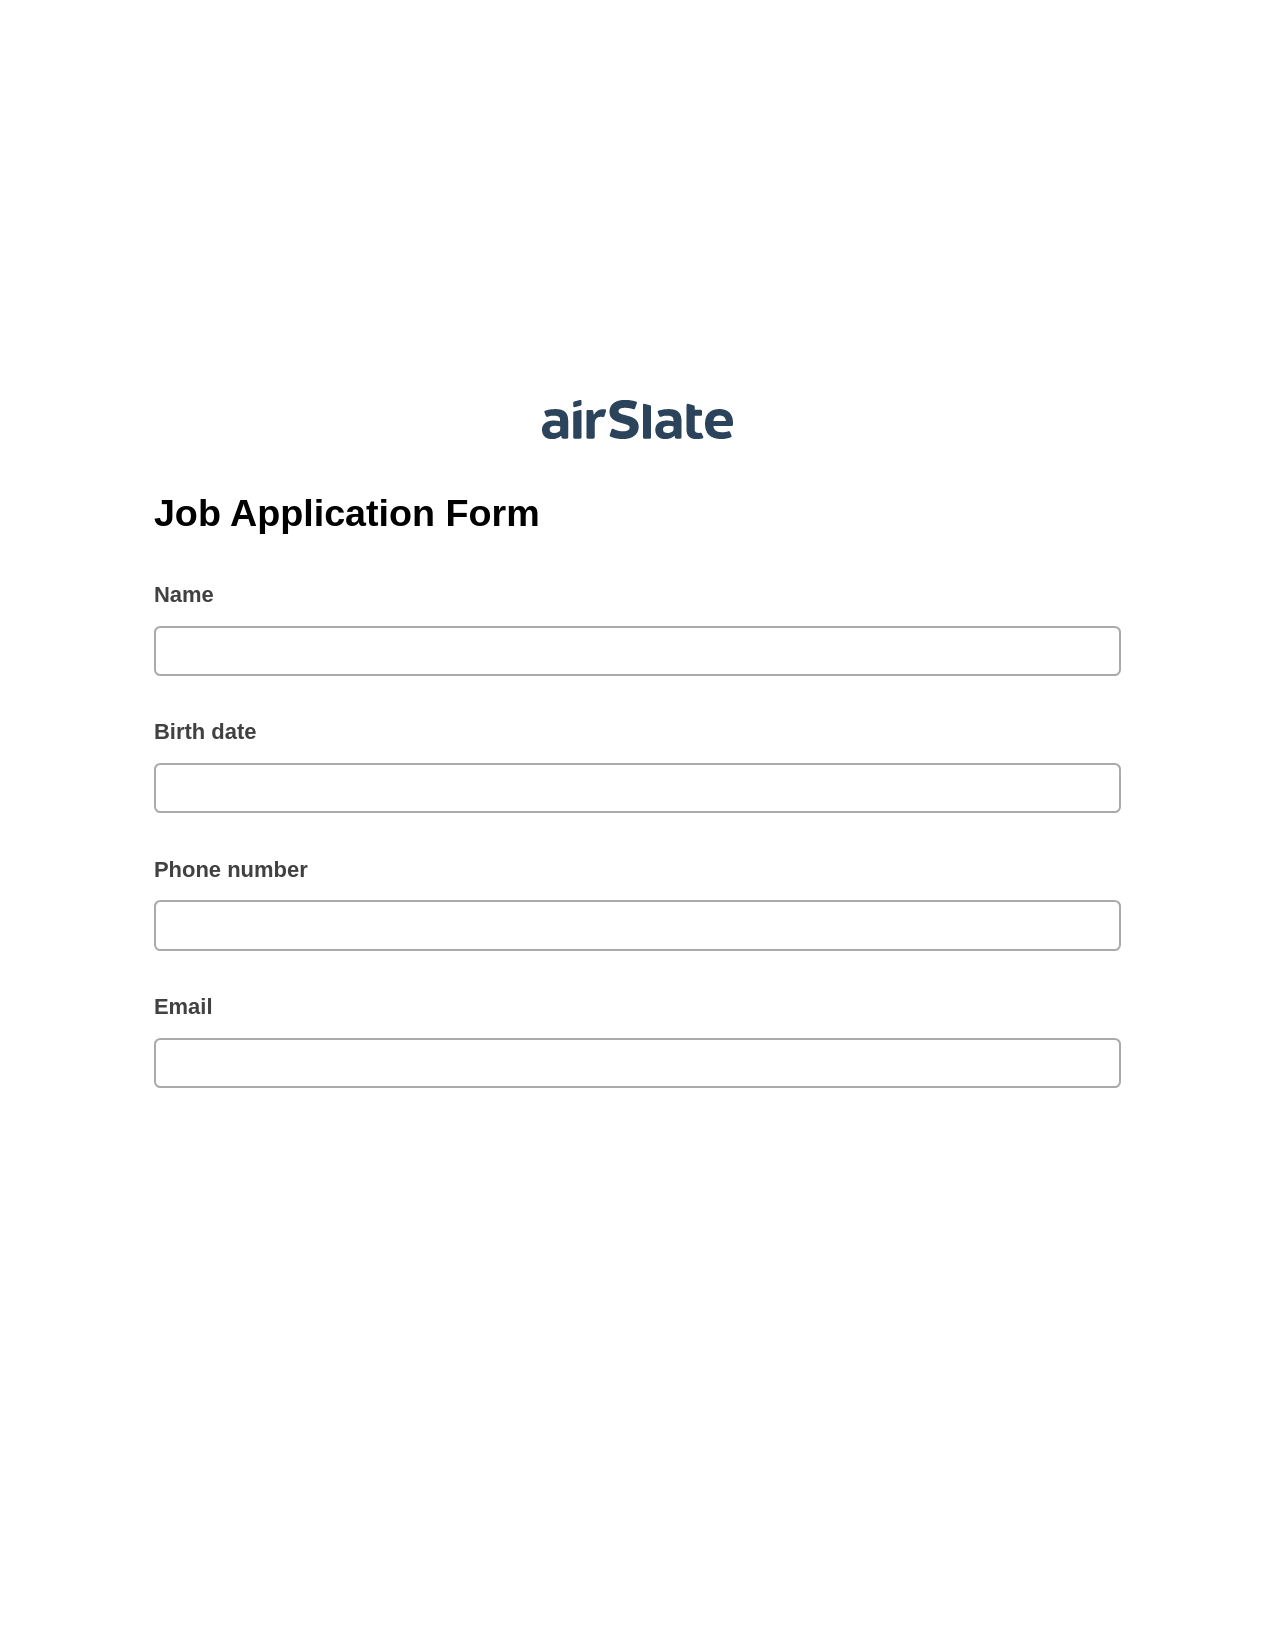 Multirole Job Application Form Pre-fill from MySQL Dropdown Options Bot, Assign Slate Name Bot, Archive to SharePoint Folder Bot